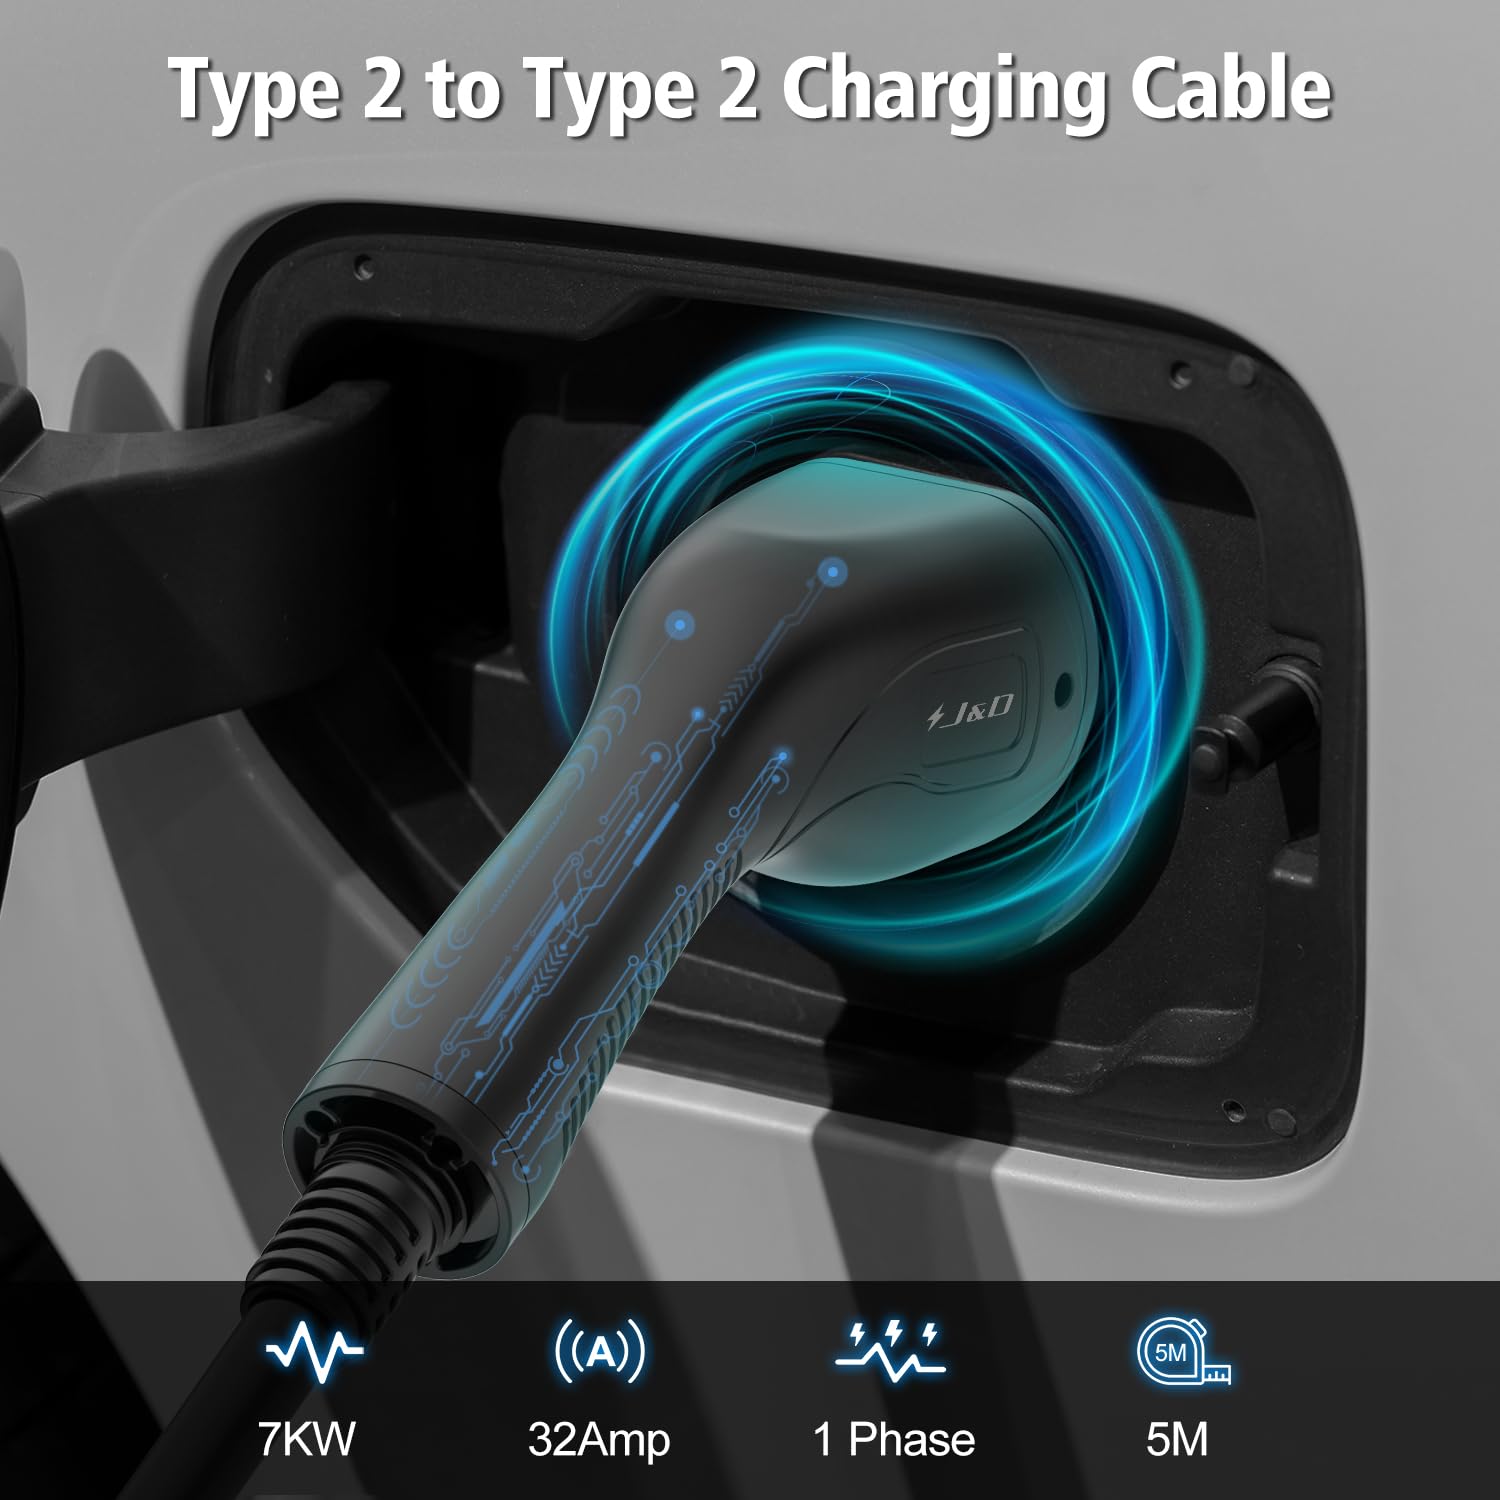 Save 60% - UK Type 2 EV Charging Cable for Electric Vehicle Model